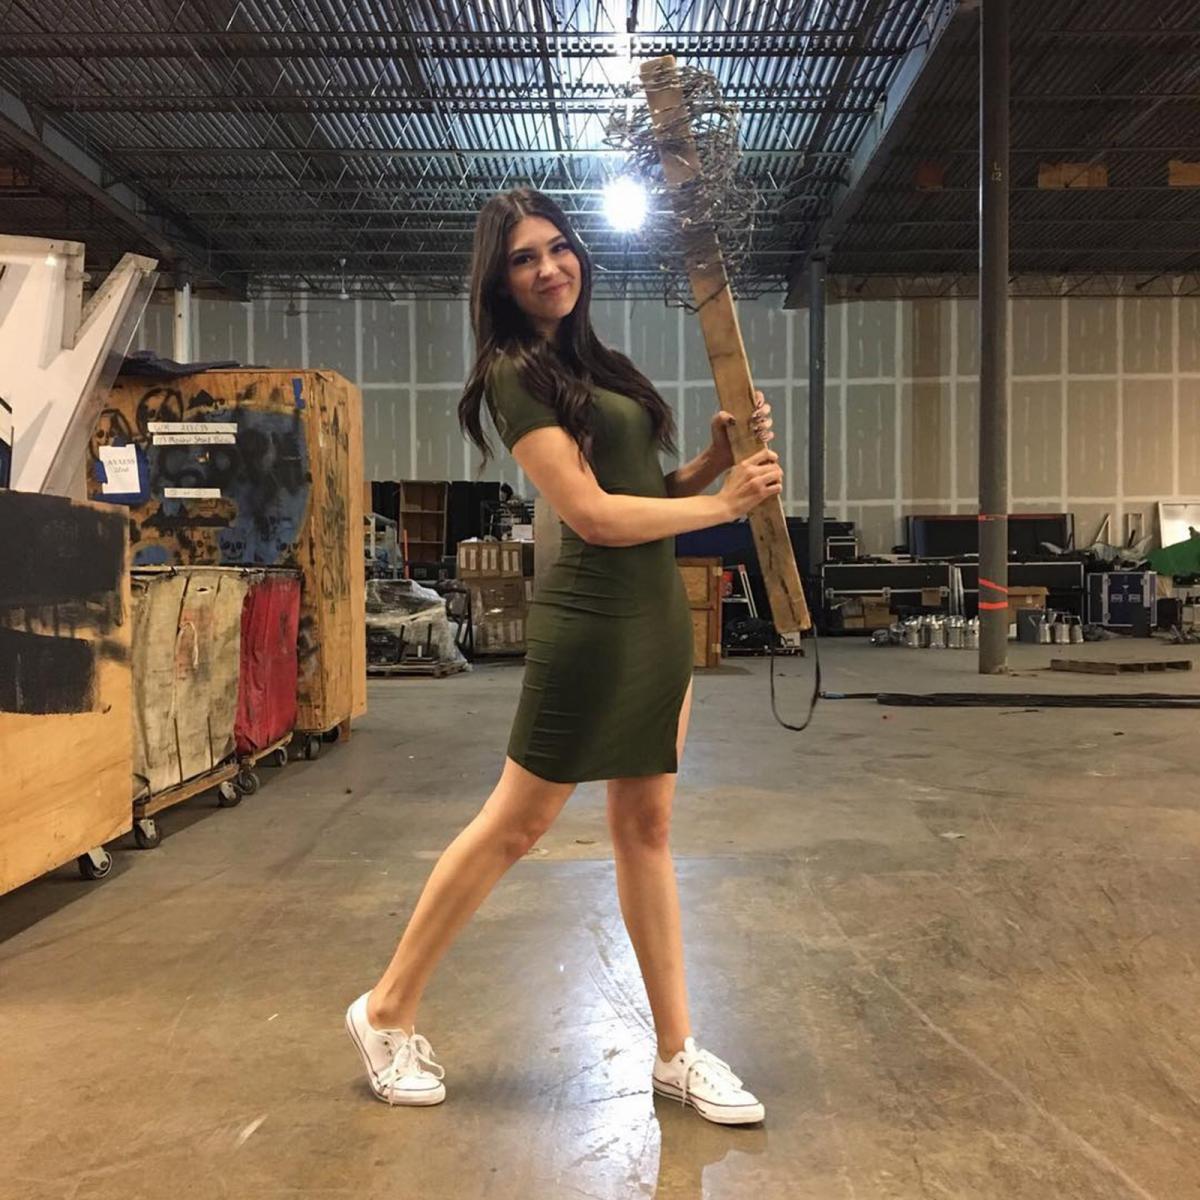 018_cathykelley1--1a466634e46fc30180c7c429cad6a4f6